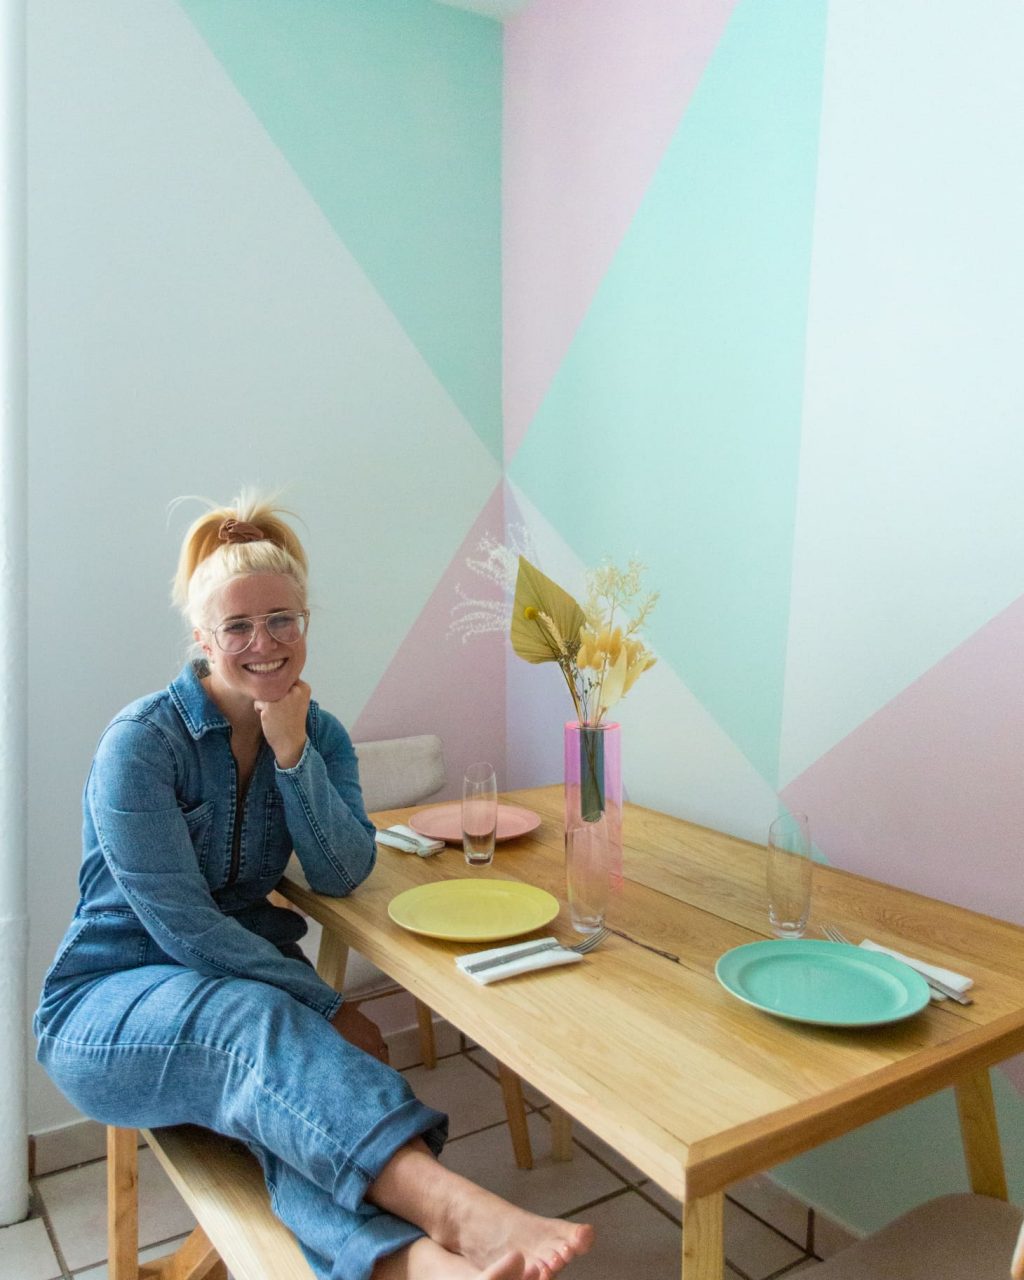 15 Trendy Pastel Wall Ideas For Your Home